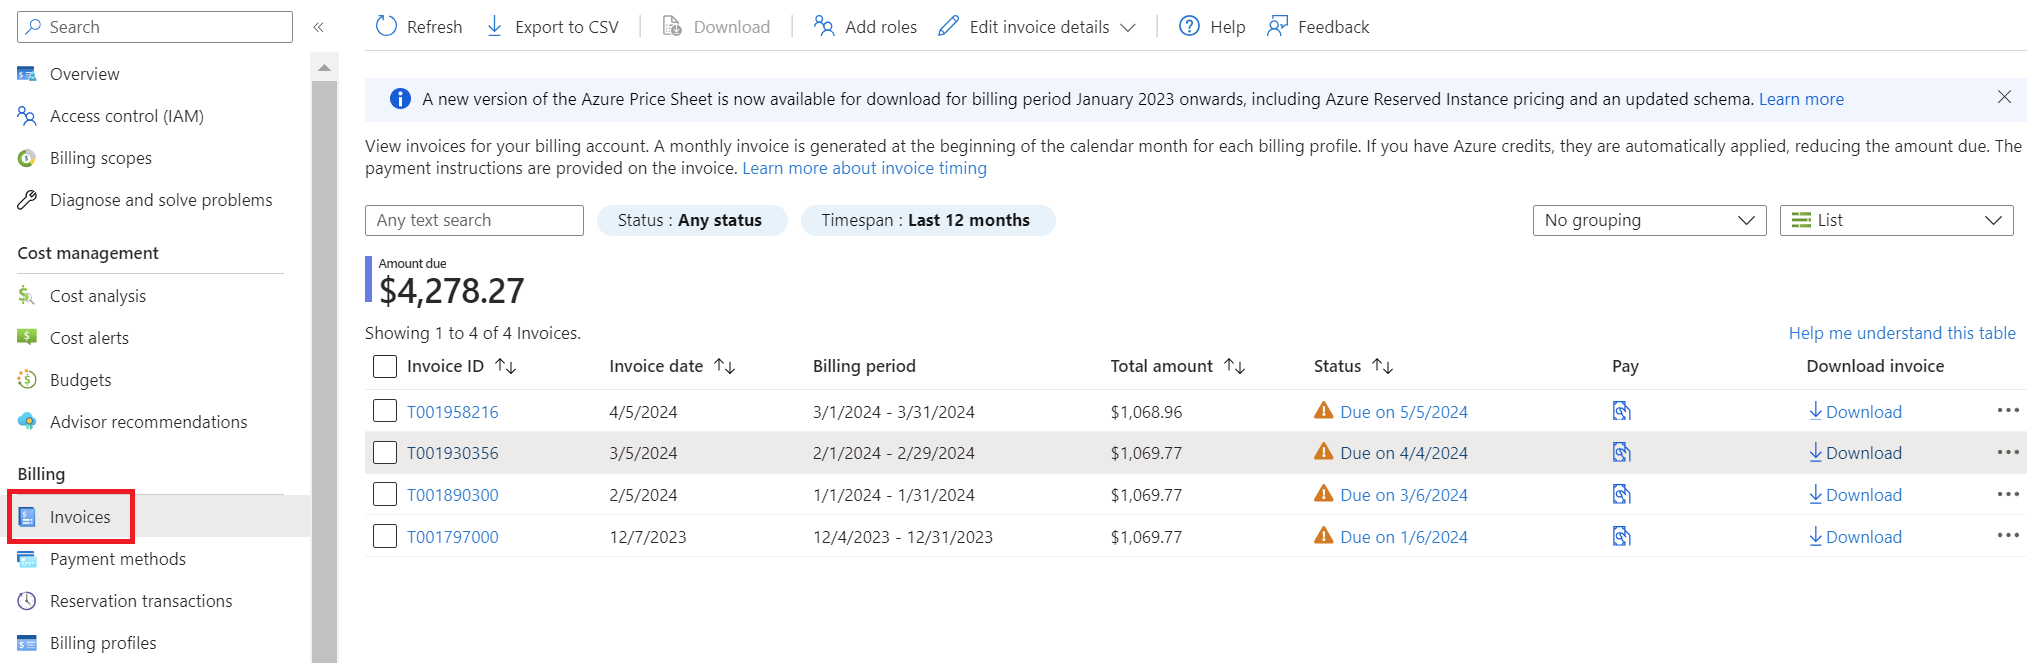 Screenshot that shows invoices page for an MCA billing account